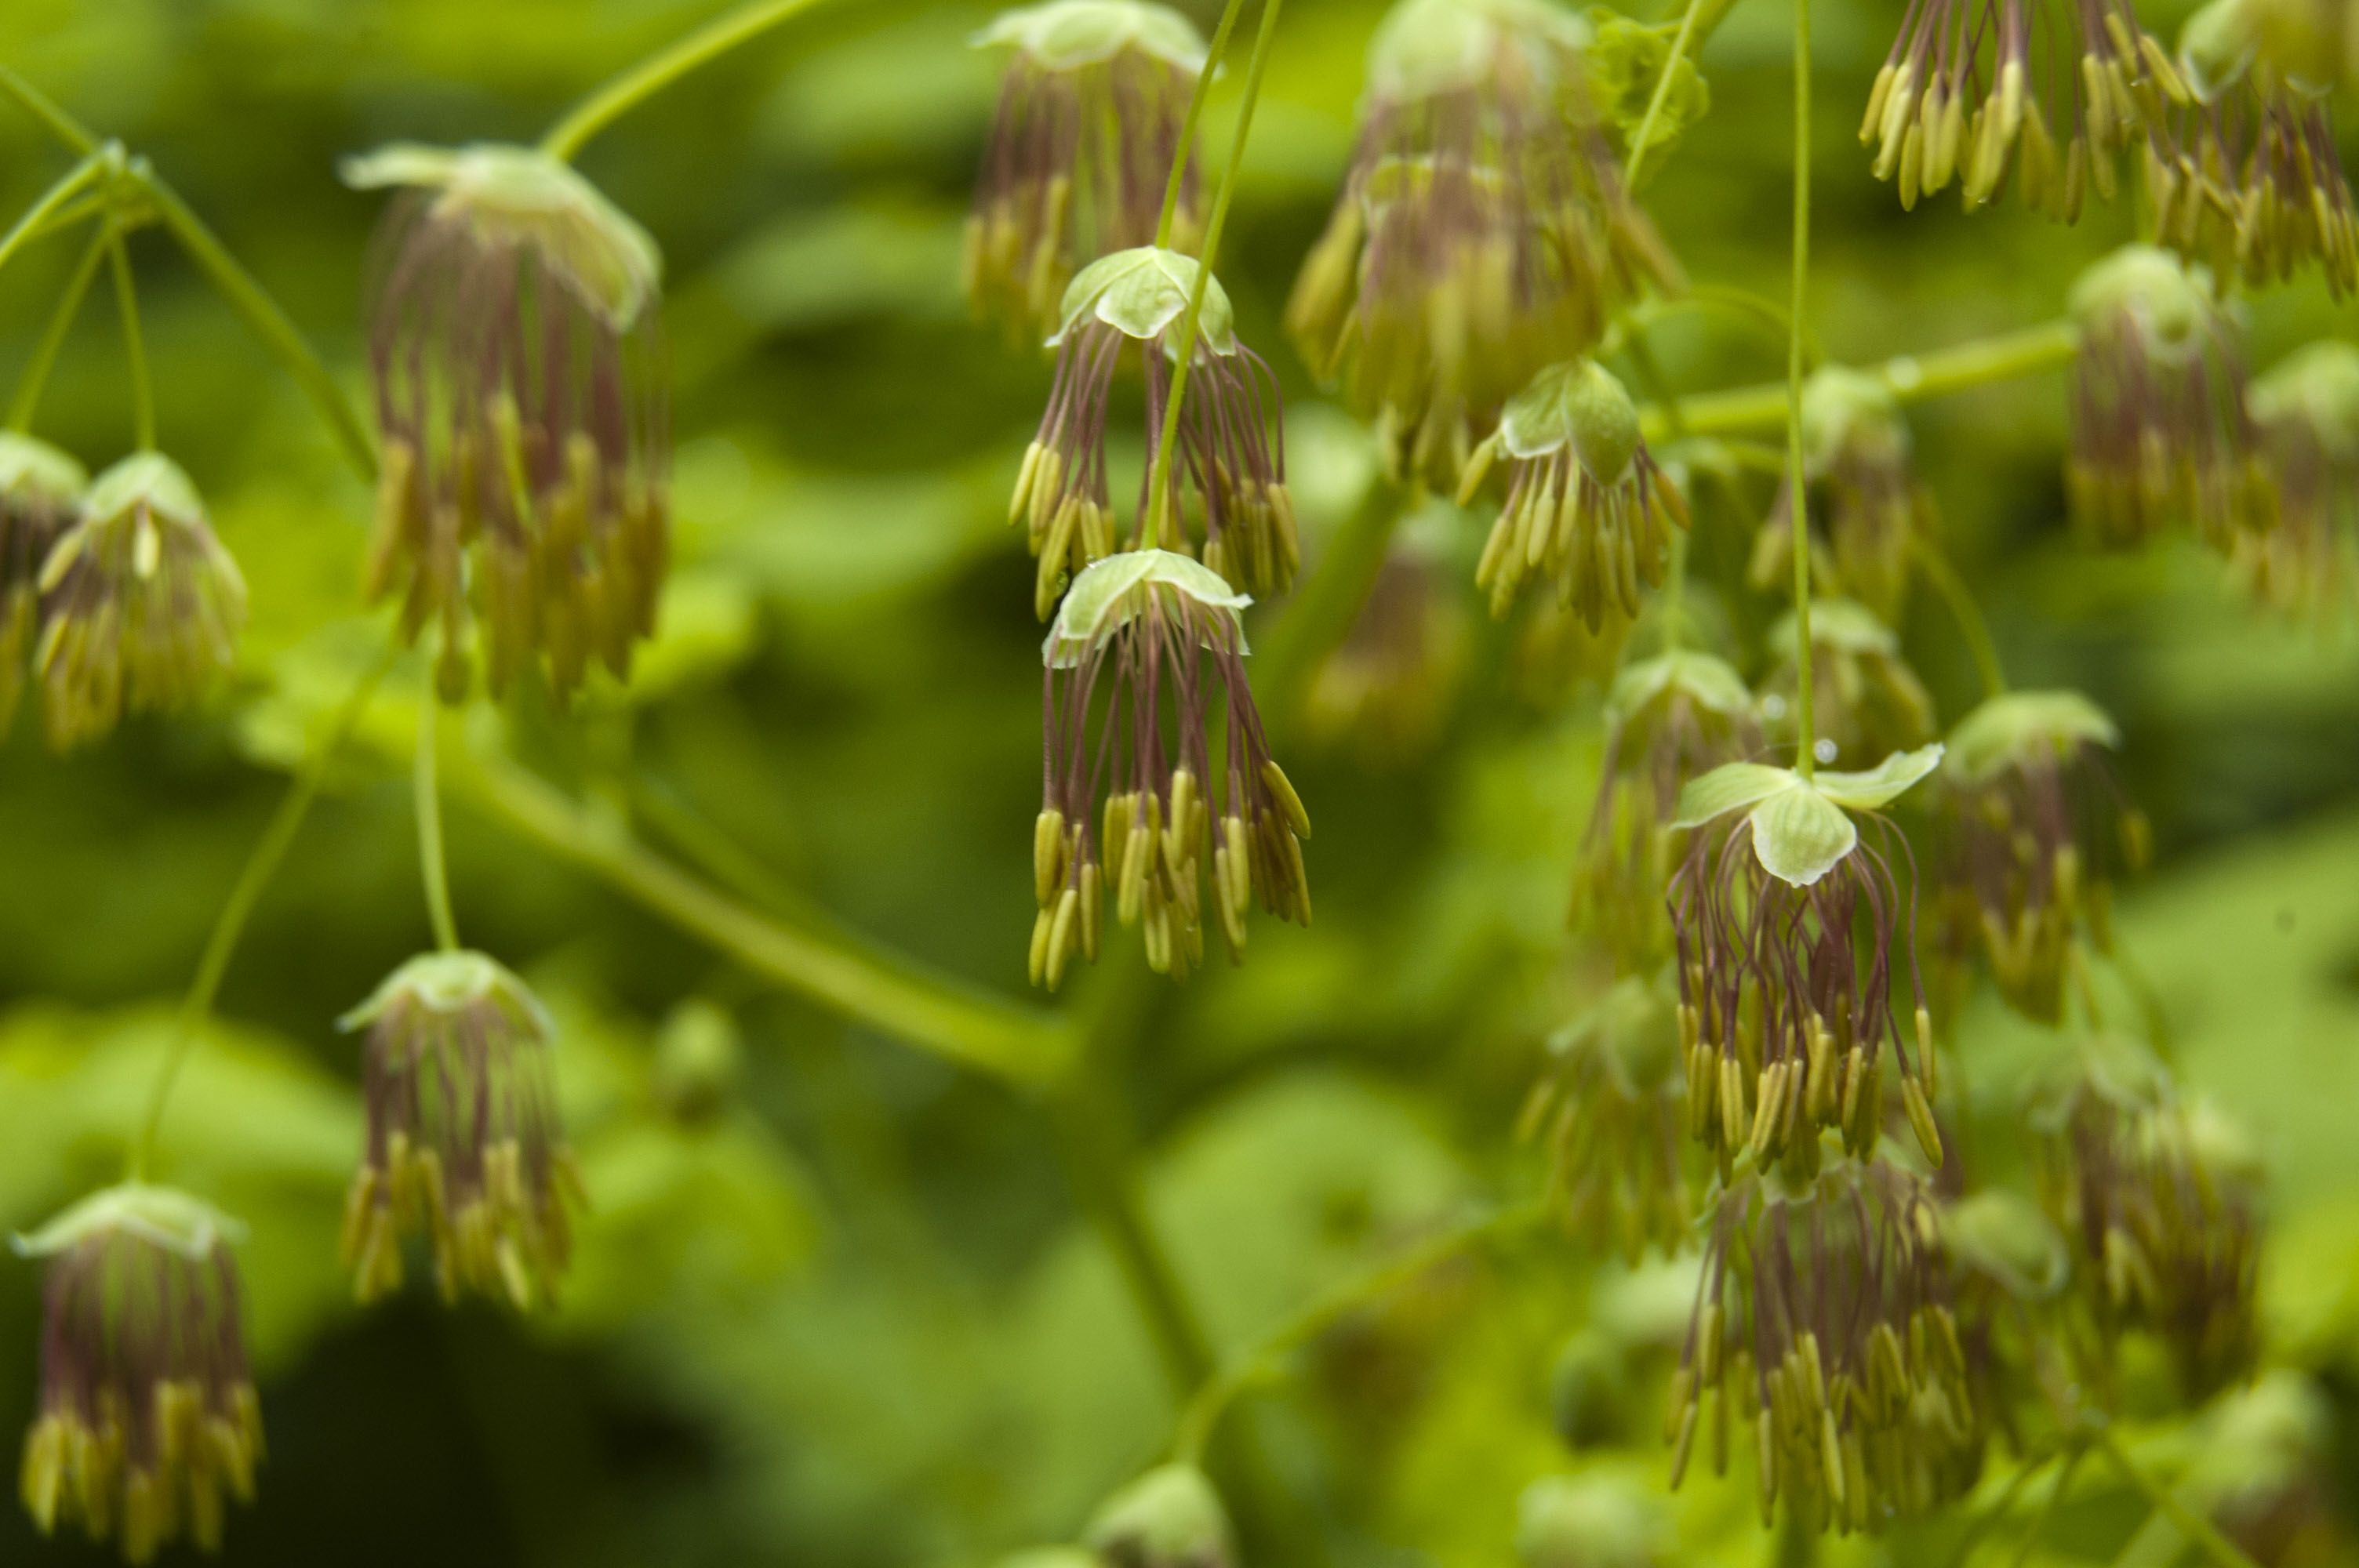 A close up of a plant with green flowers.